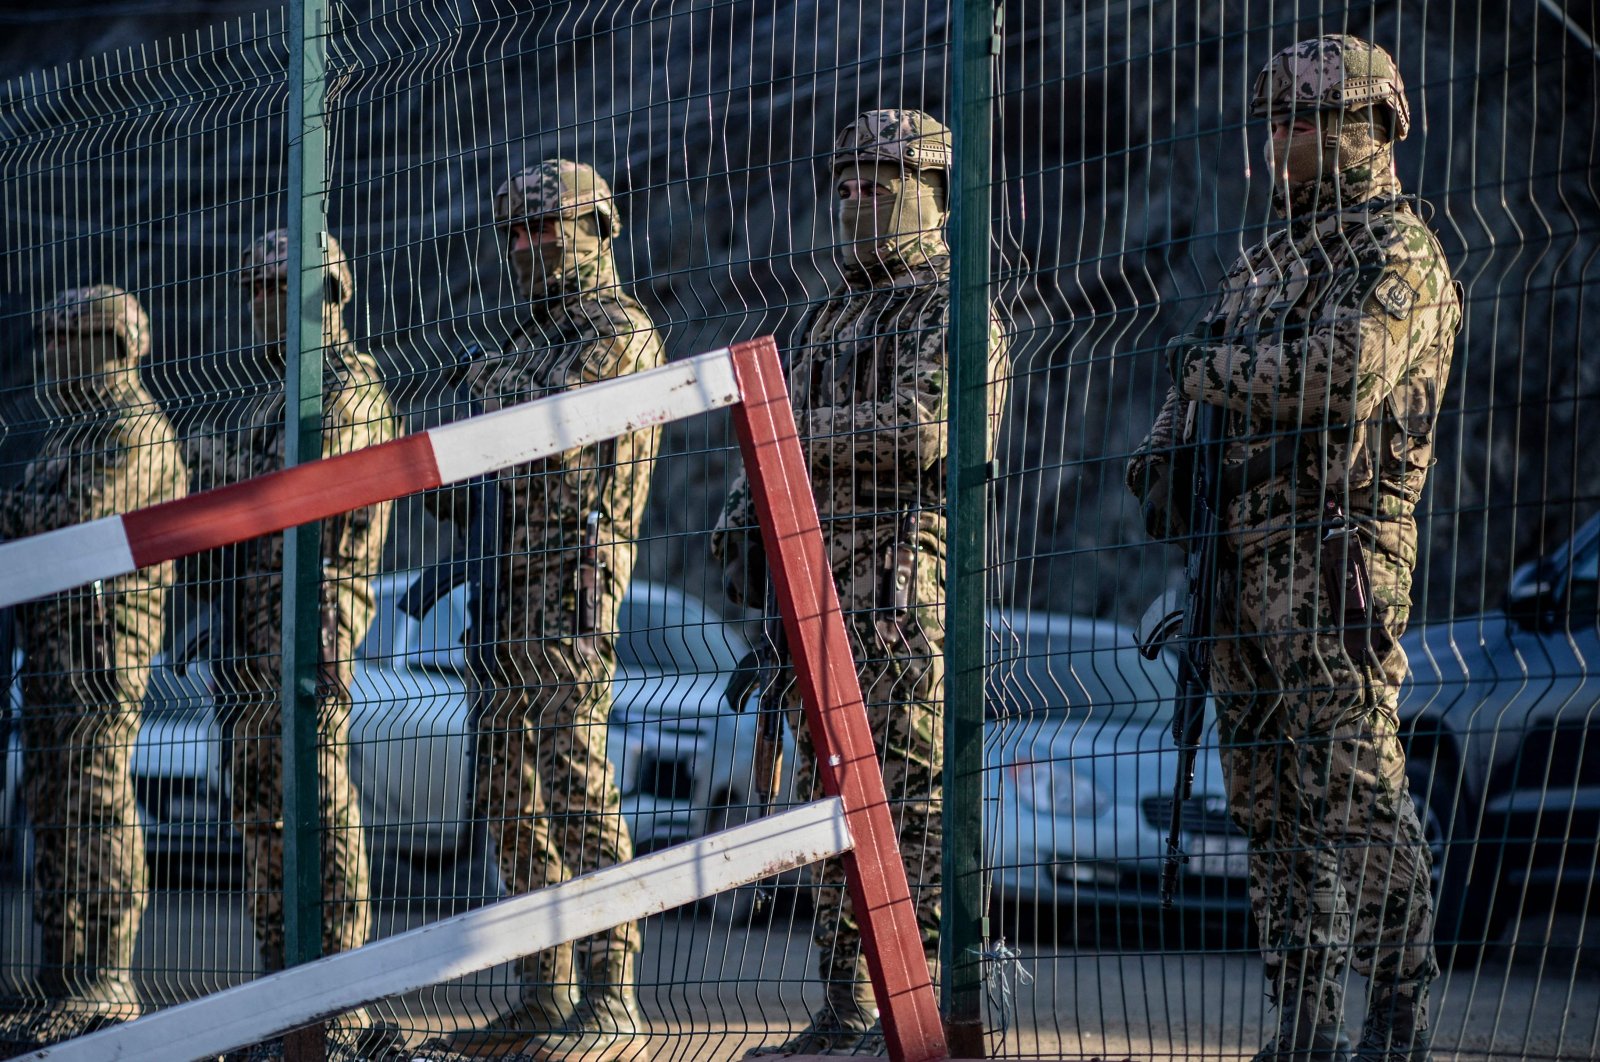 Azerbaijani soldiers stand guard at a checkpoint at the Lachin corridor, Karabakh region&#039;s only land link with Armenia, as Azerbaijani environmental activists protest against illegal mining, Karabakh, Azerbaijan, Dec. 27, 2022. (AFP Photo)